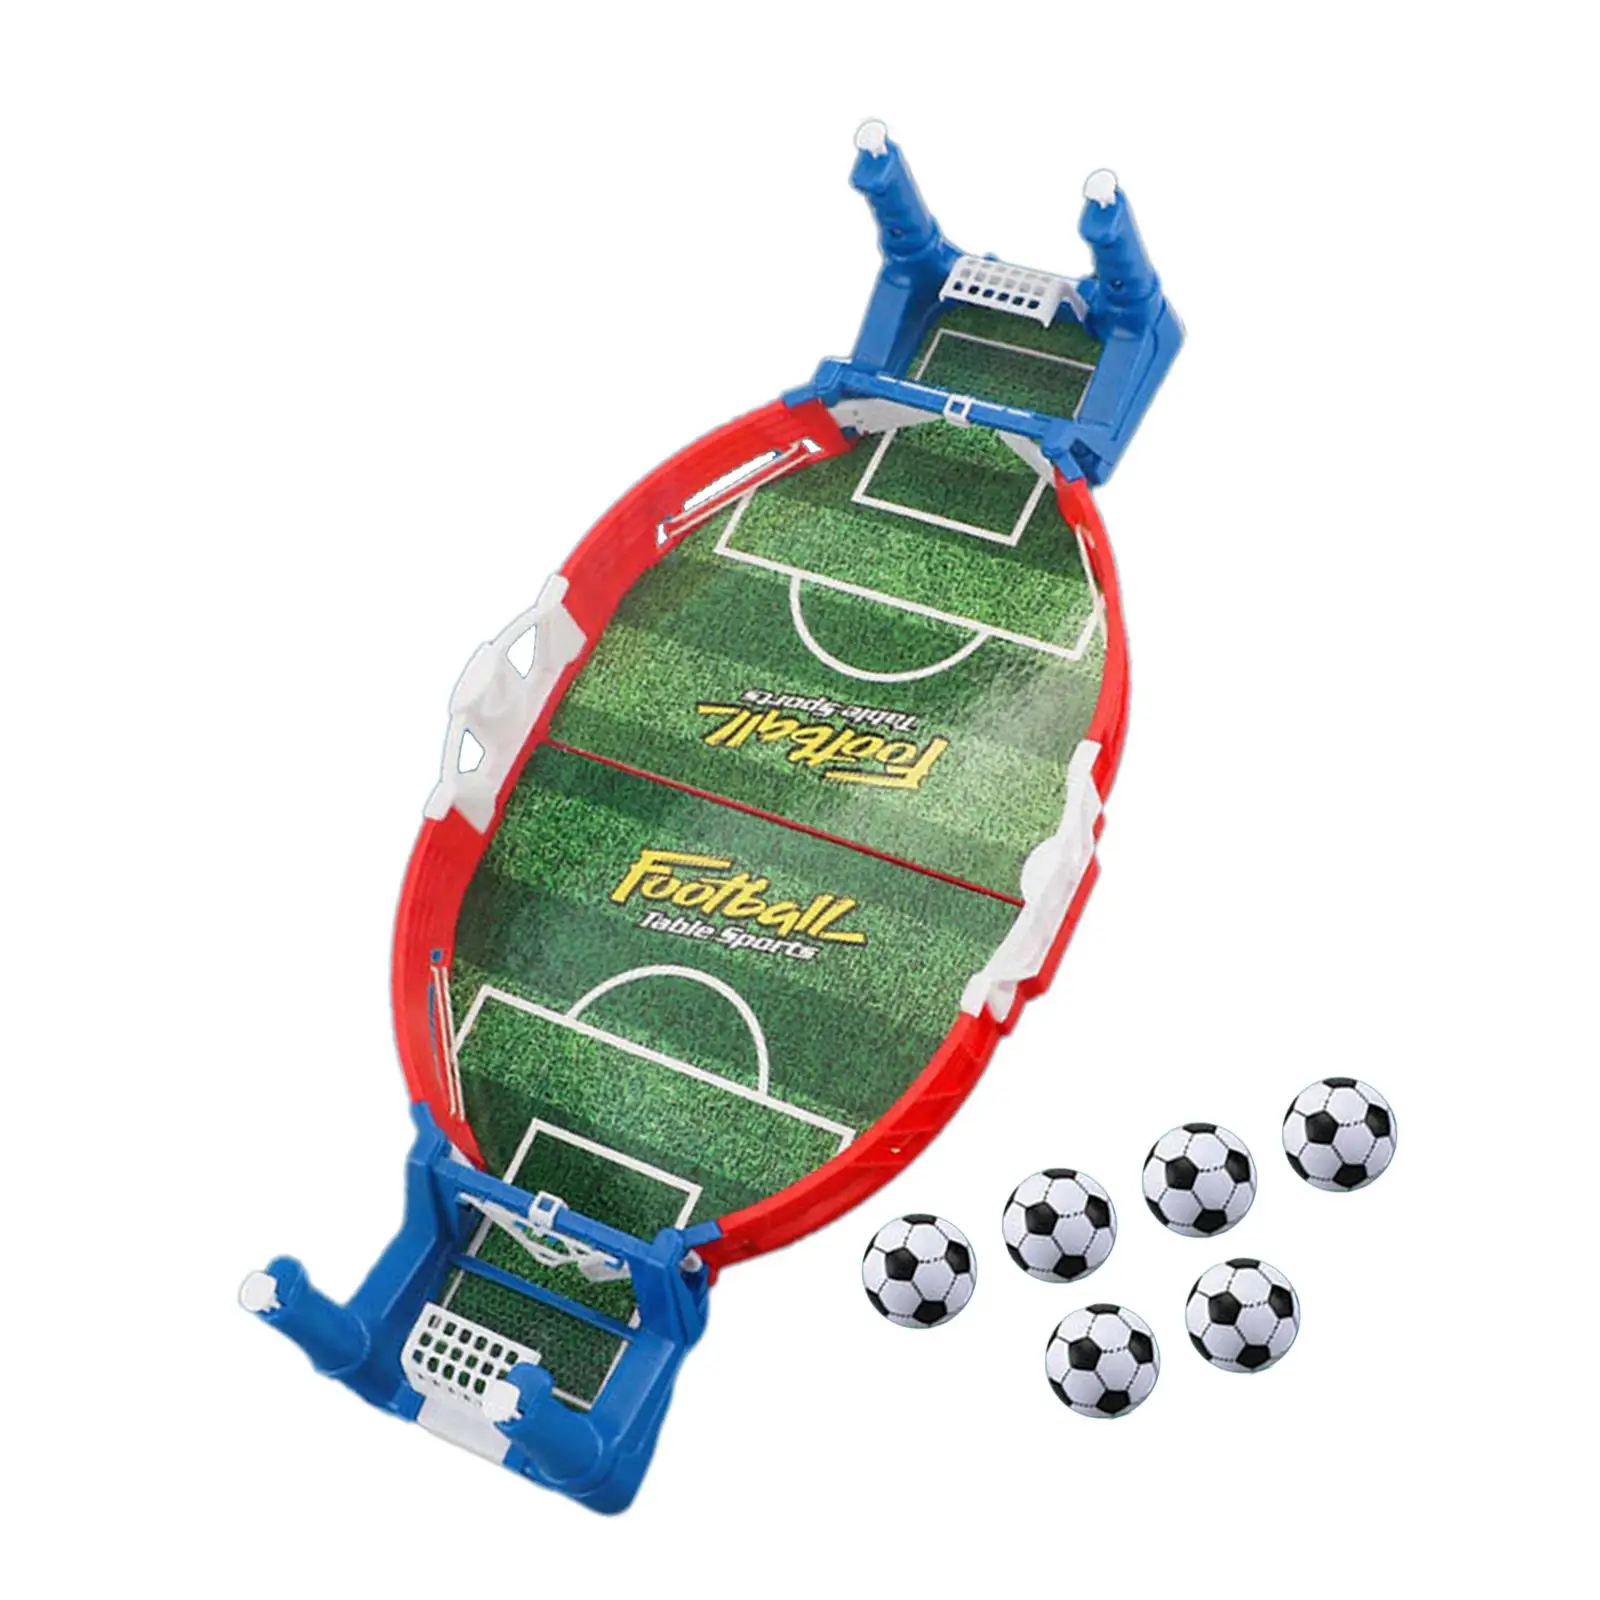 Table Soccer Football Game, Interactive Toys, Mini Tabletop Football Soccer Pinball Games for Boys Kids